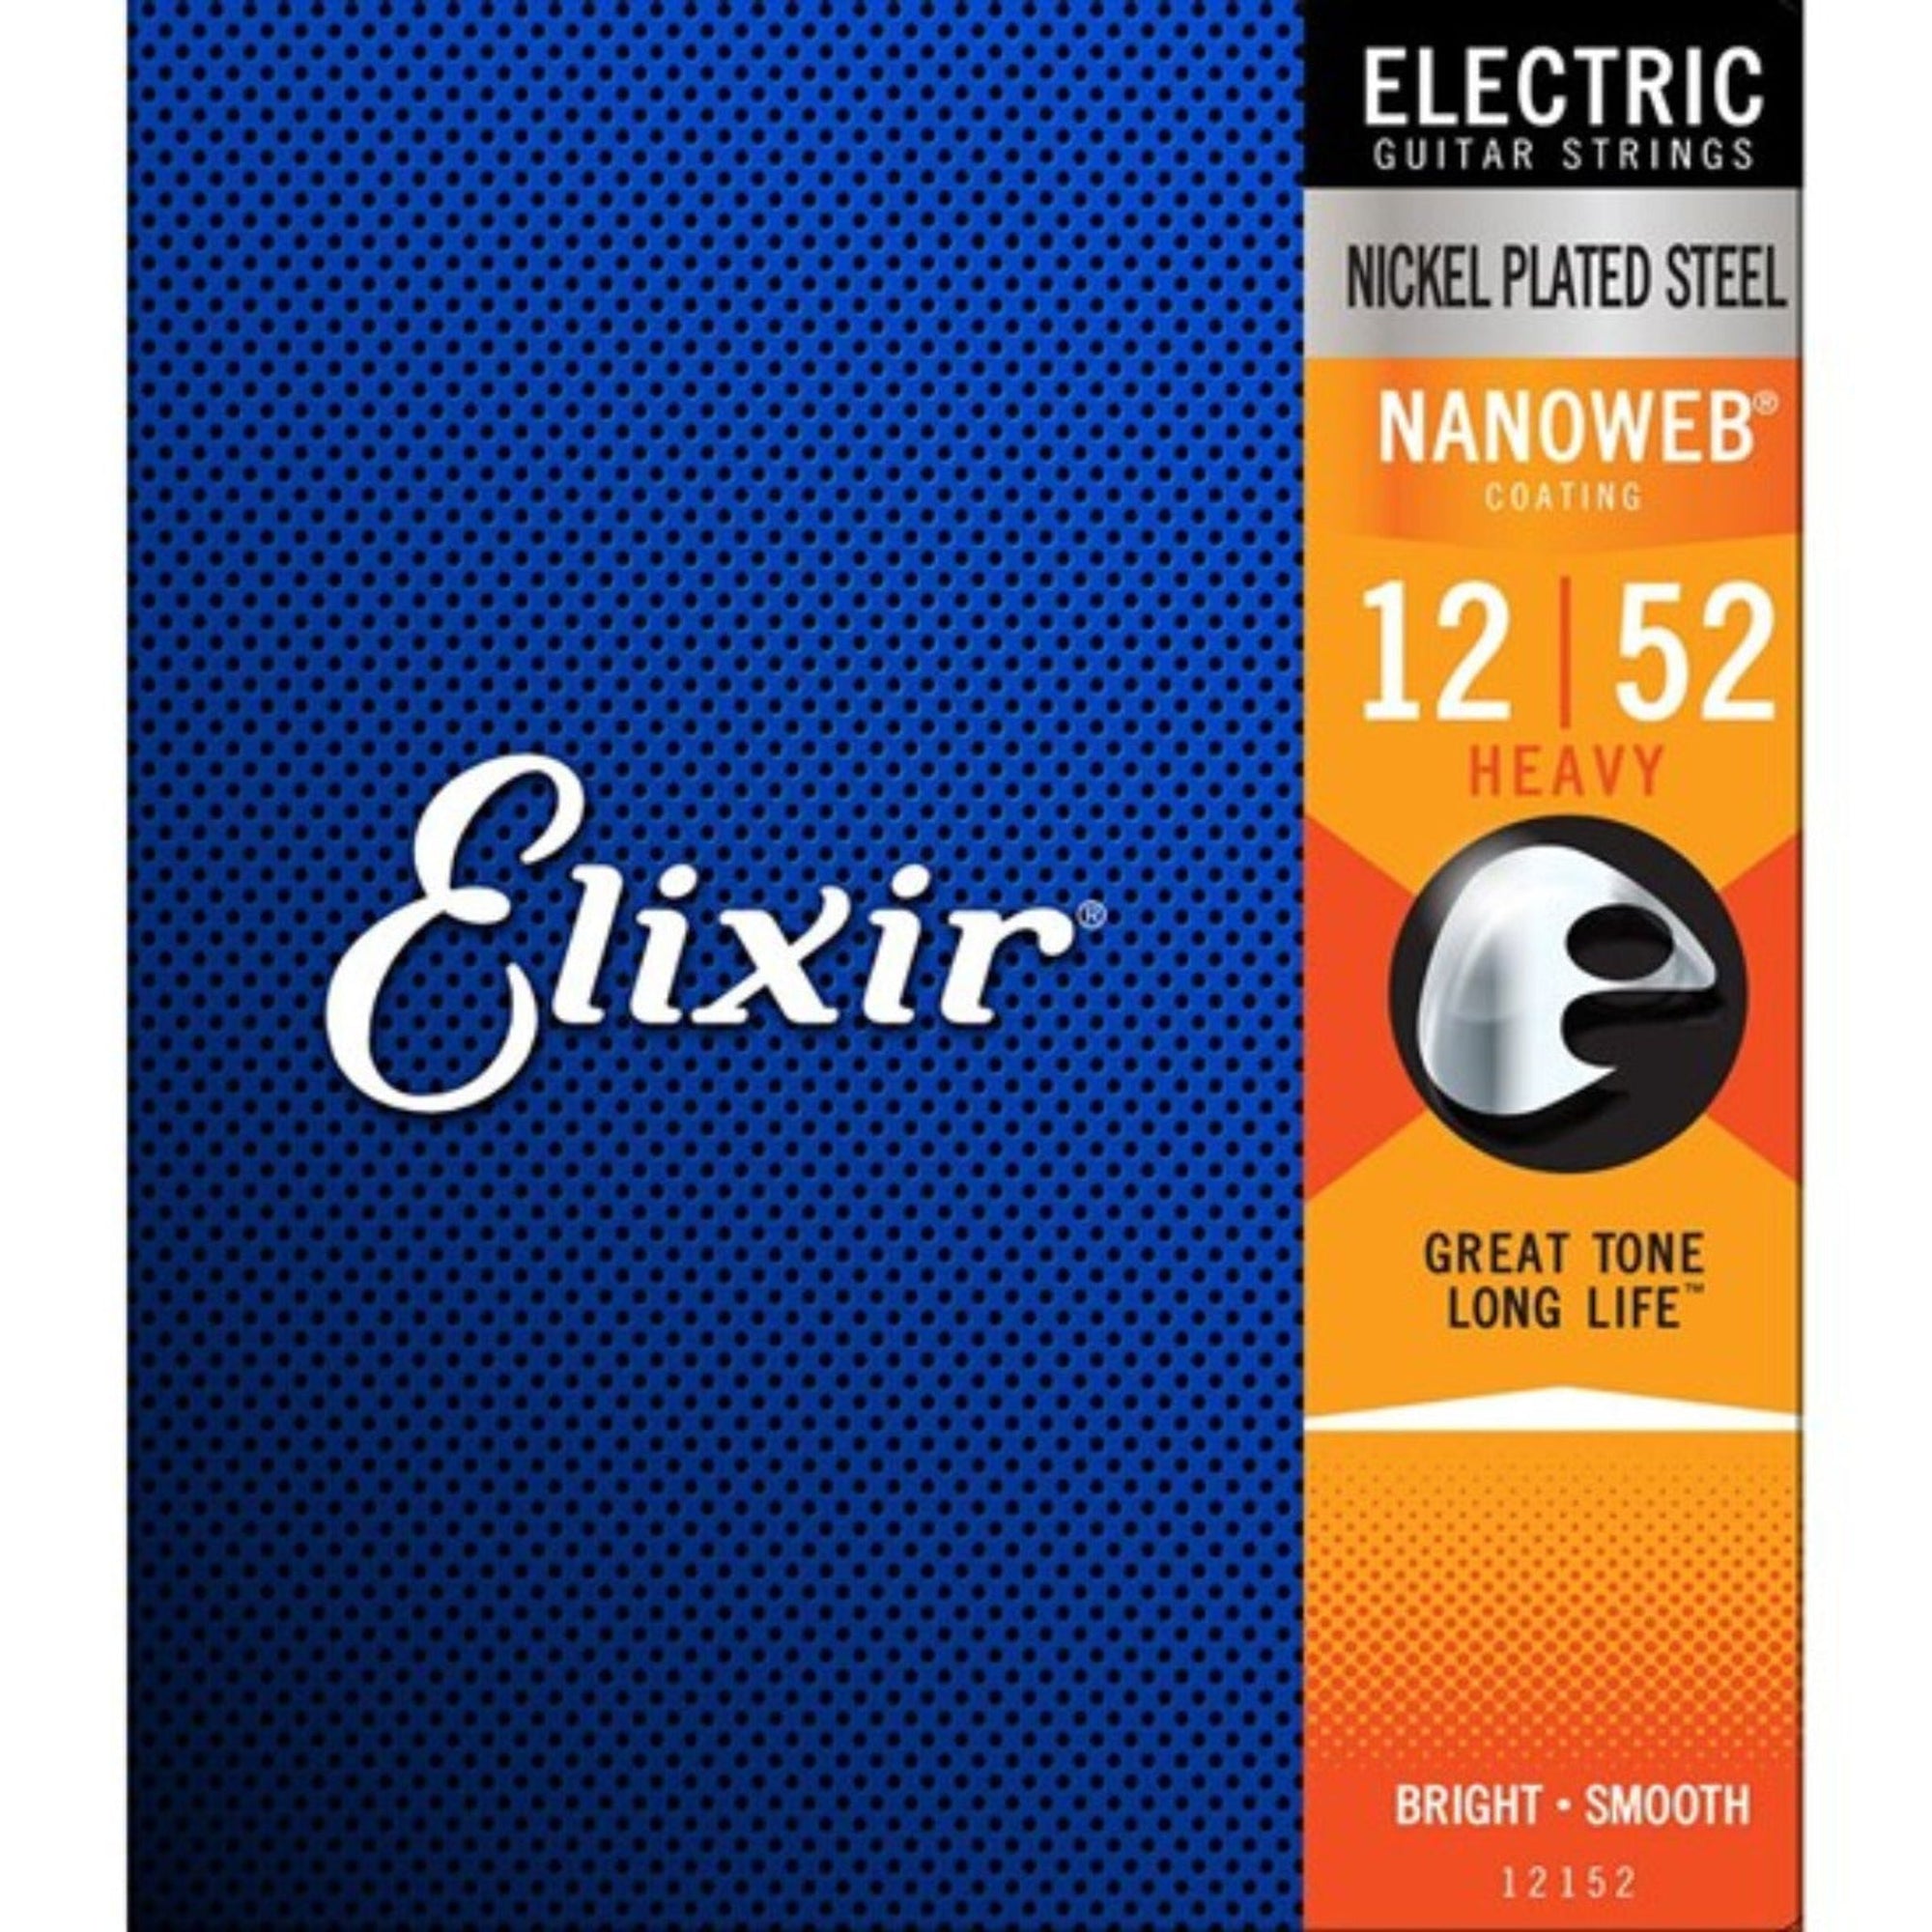 The Elixir 12152 strings are known for their great tone and long life. Elixir strings amp up your guitar’s tone life with the same premium electric guitar strings that experienced players worldwide